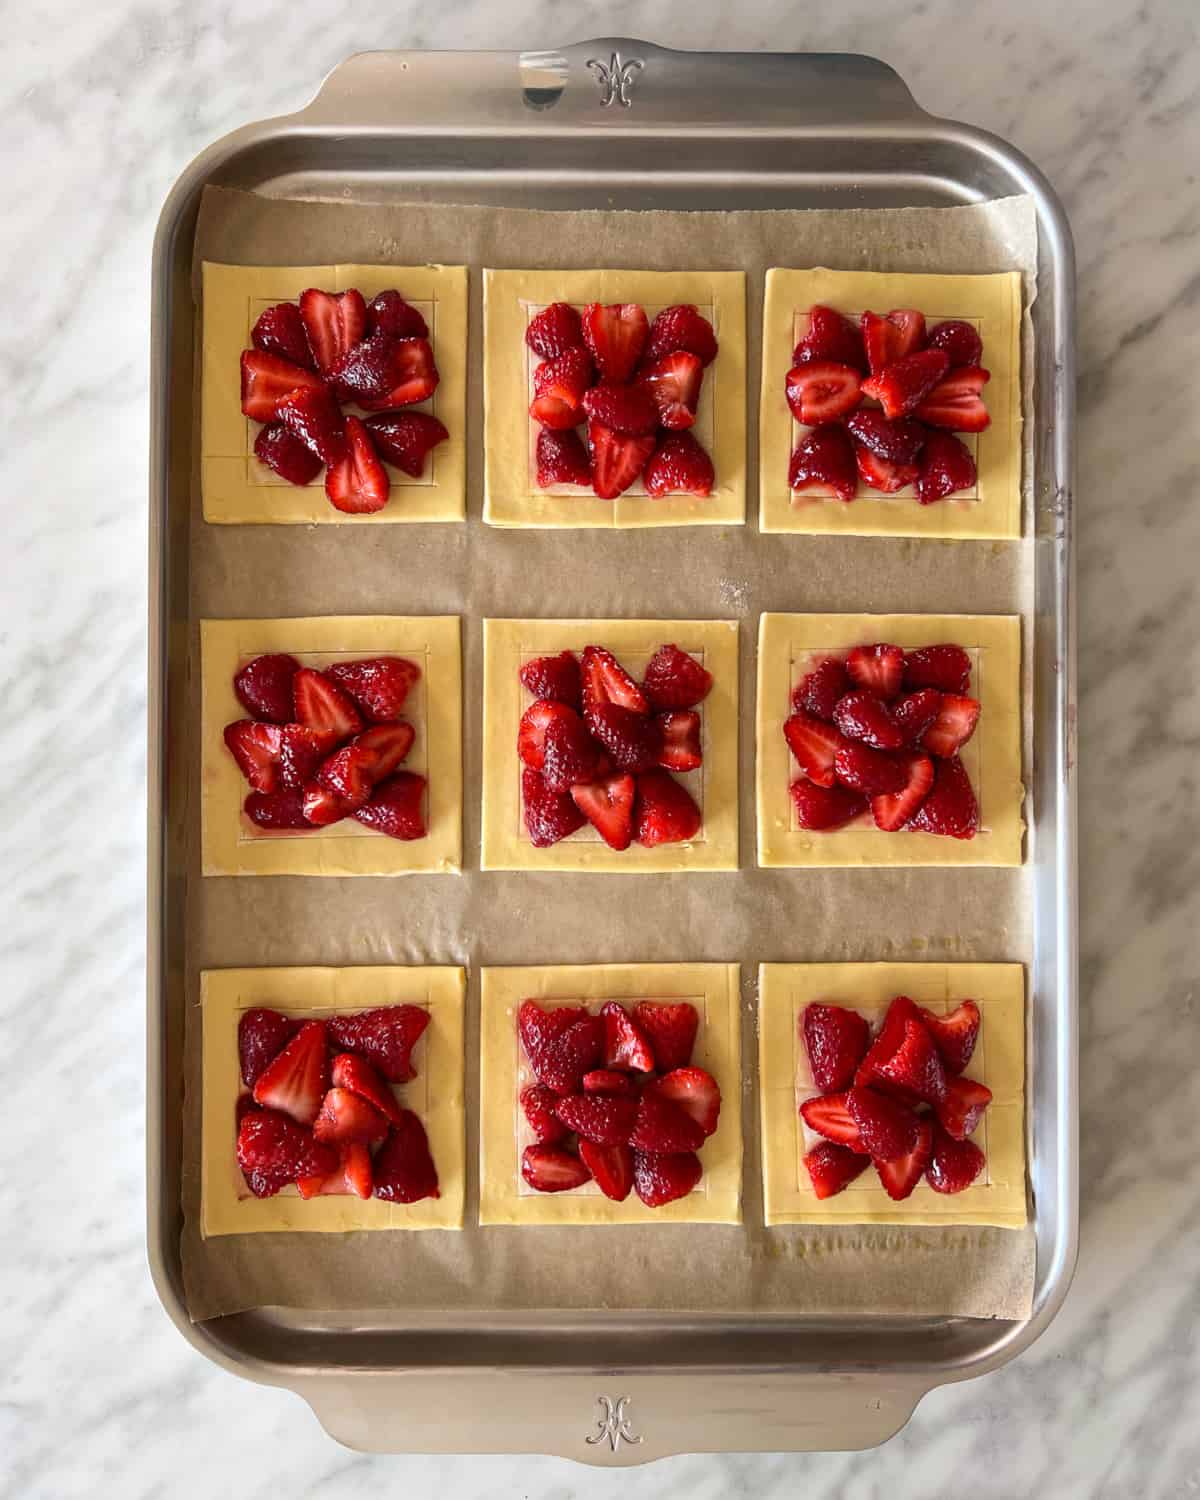 Nine puff pastry square with strawberries placed in the center ready to go into the oven.